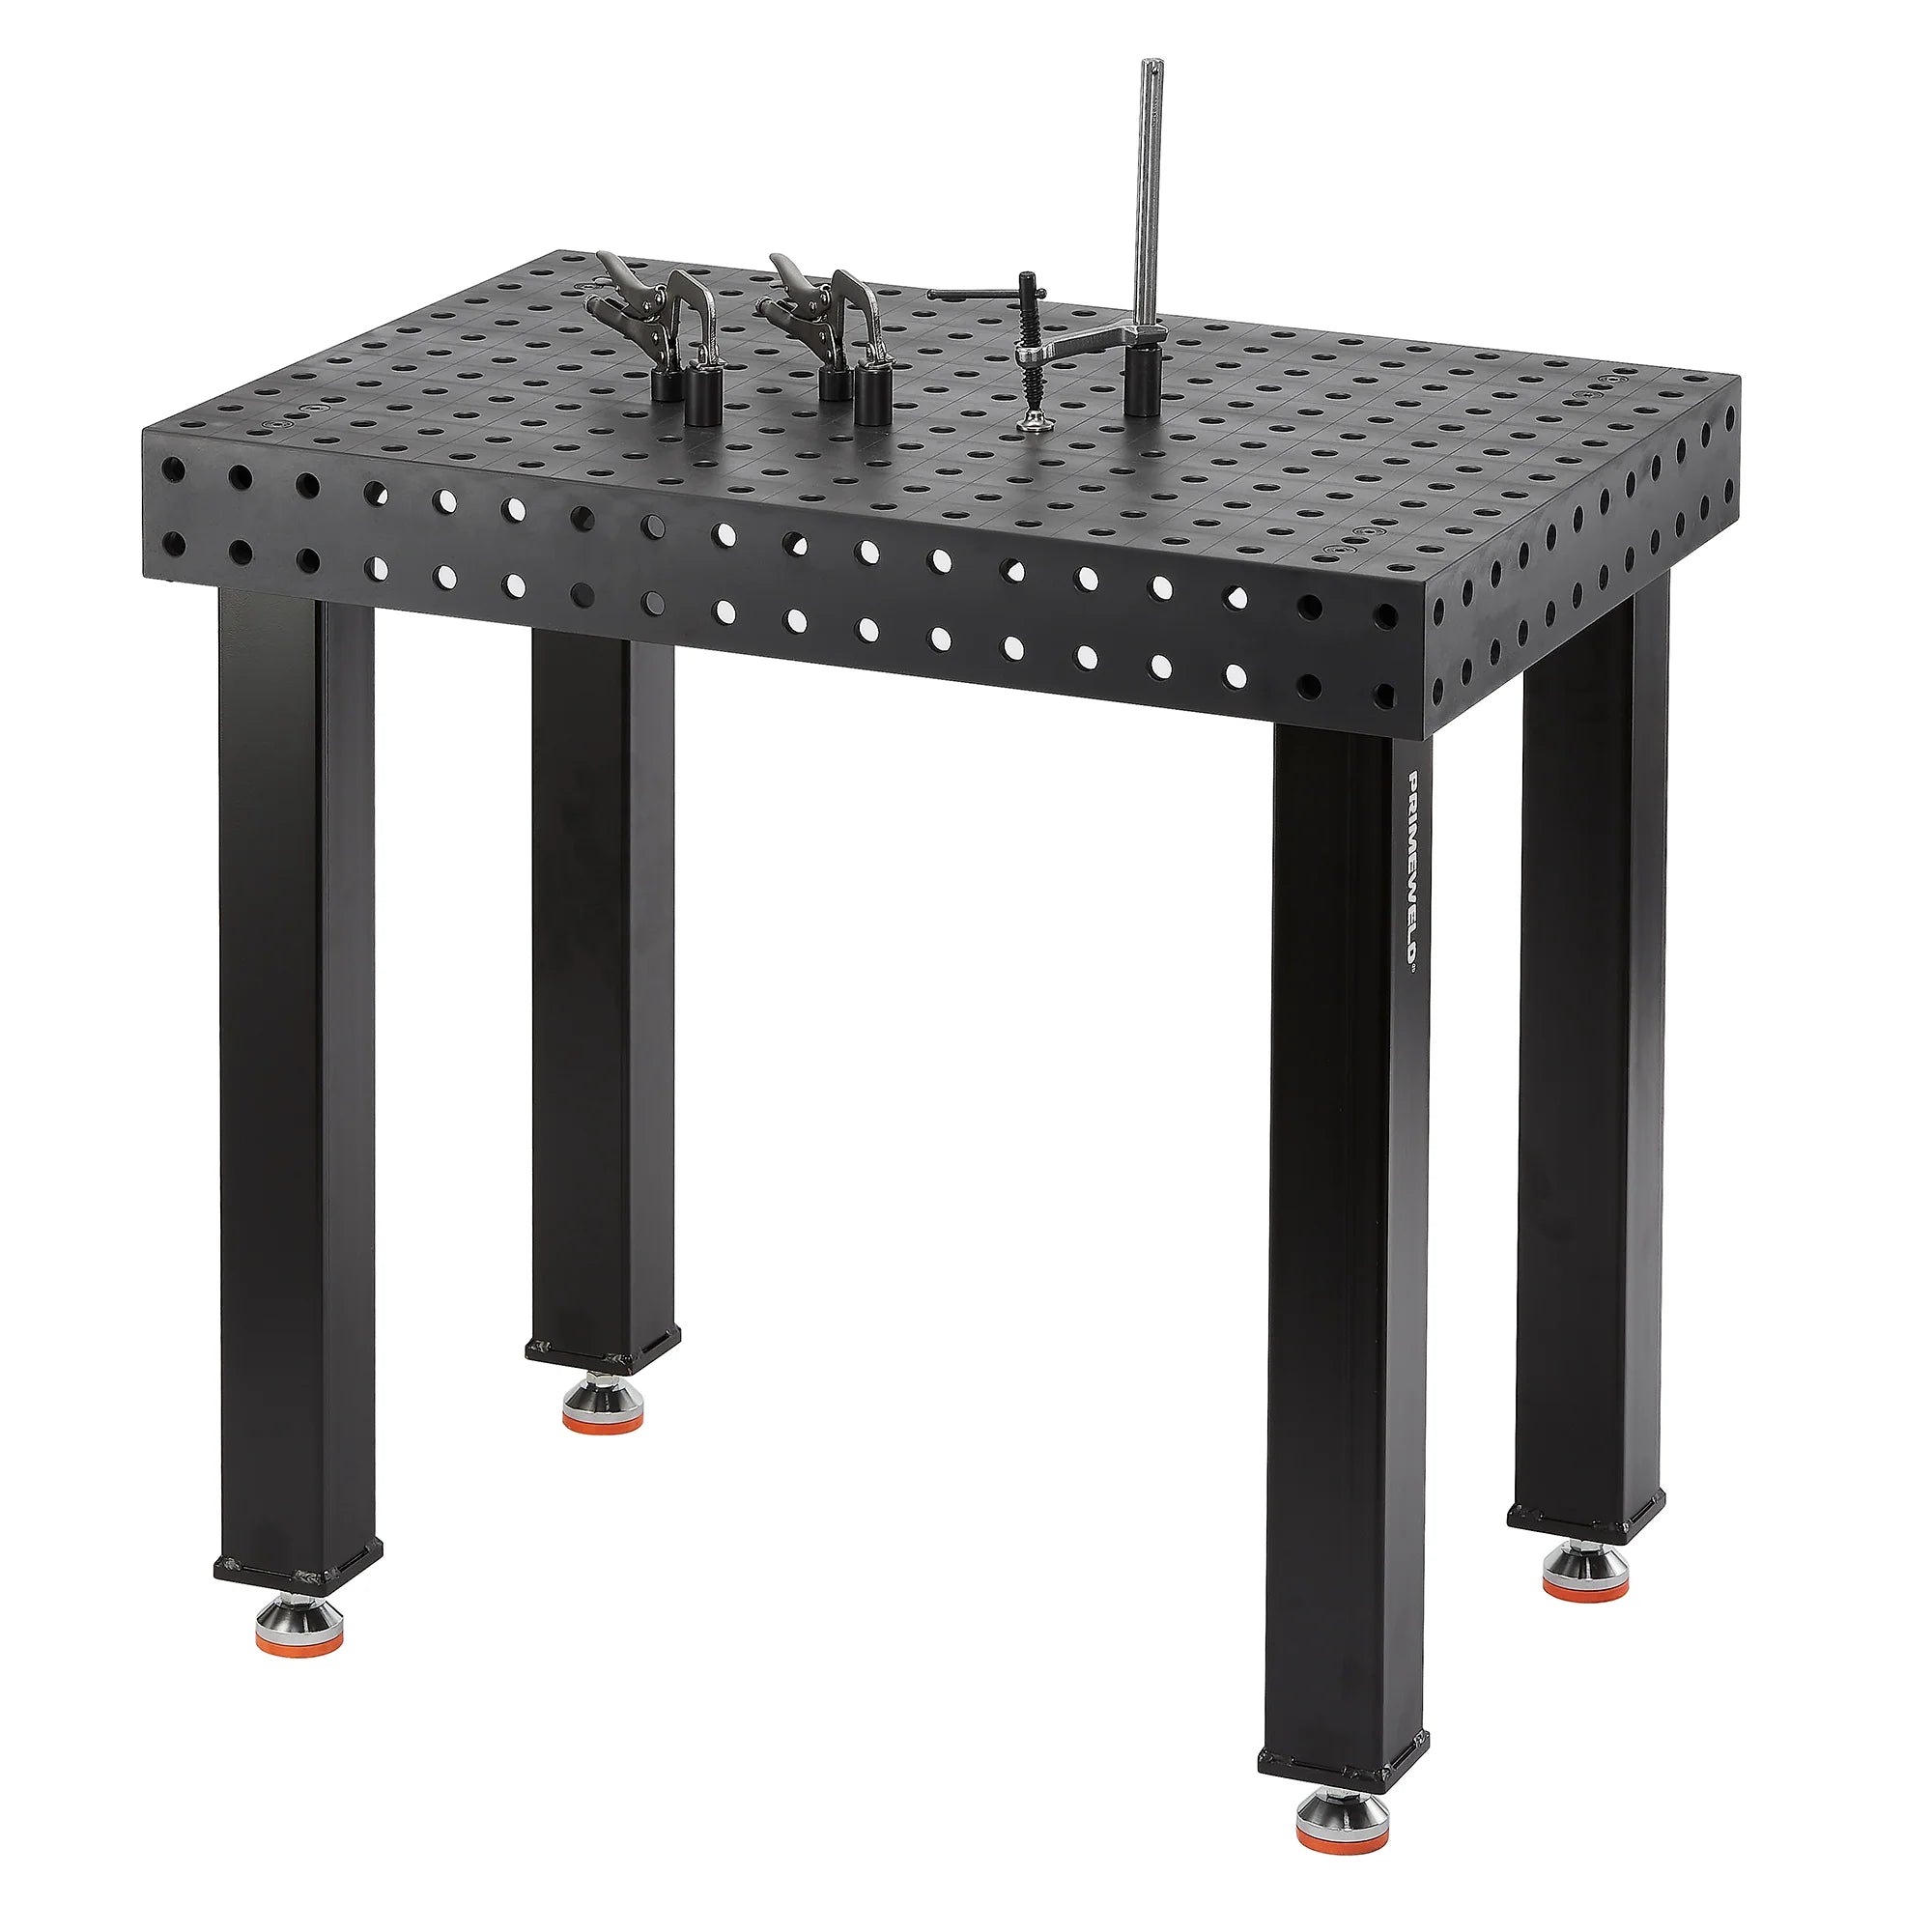 PrimeWeld Fixture Table 2 x 3 Cast Iron With Nitrate Coating and Legs